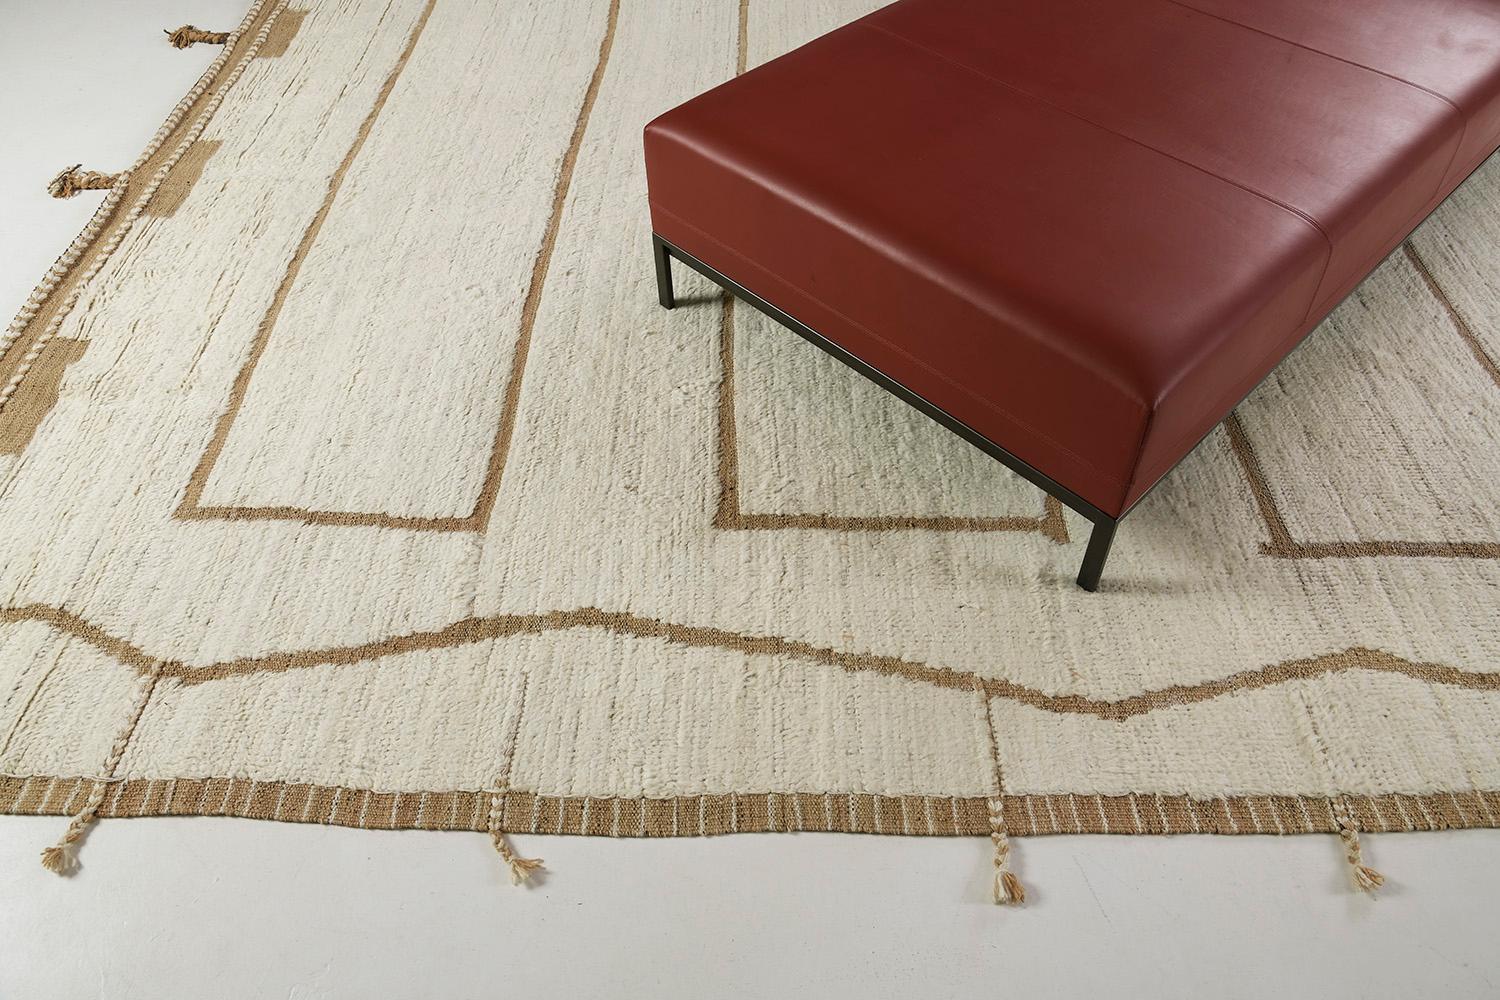 Cierzo is a signature collection of California. Handwoven luxurious wool rug, made of remarkable design elements through brown and gold tones. Haute Bohemian collection: designed in Los Angeles named for the winds knitting together seasons, trees,